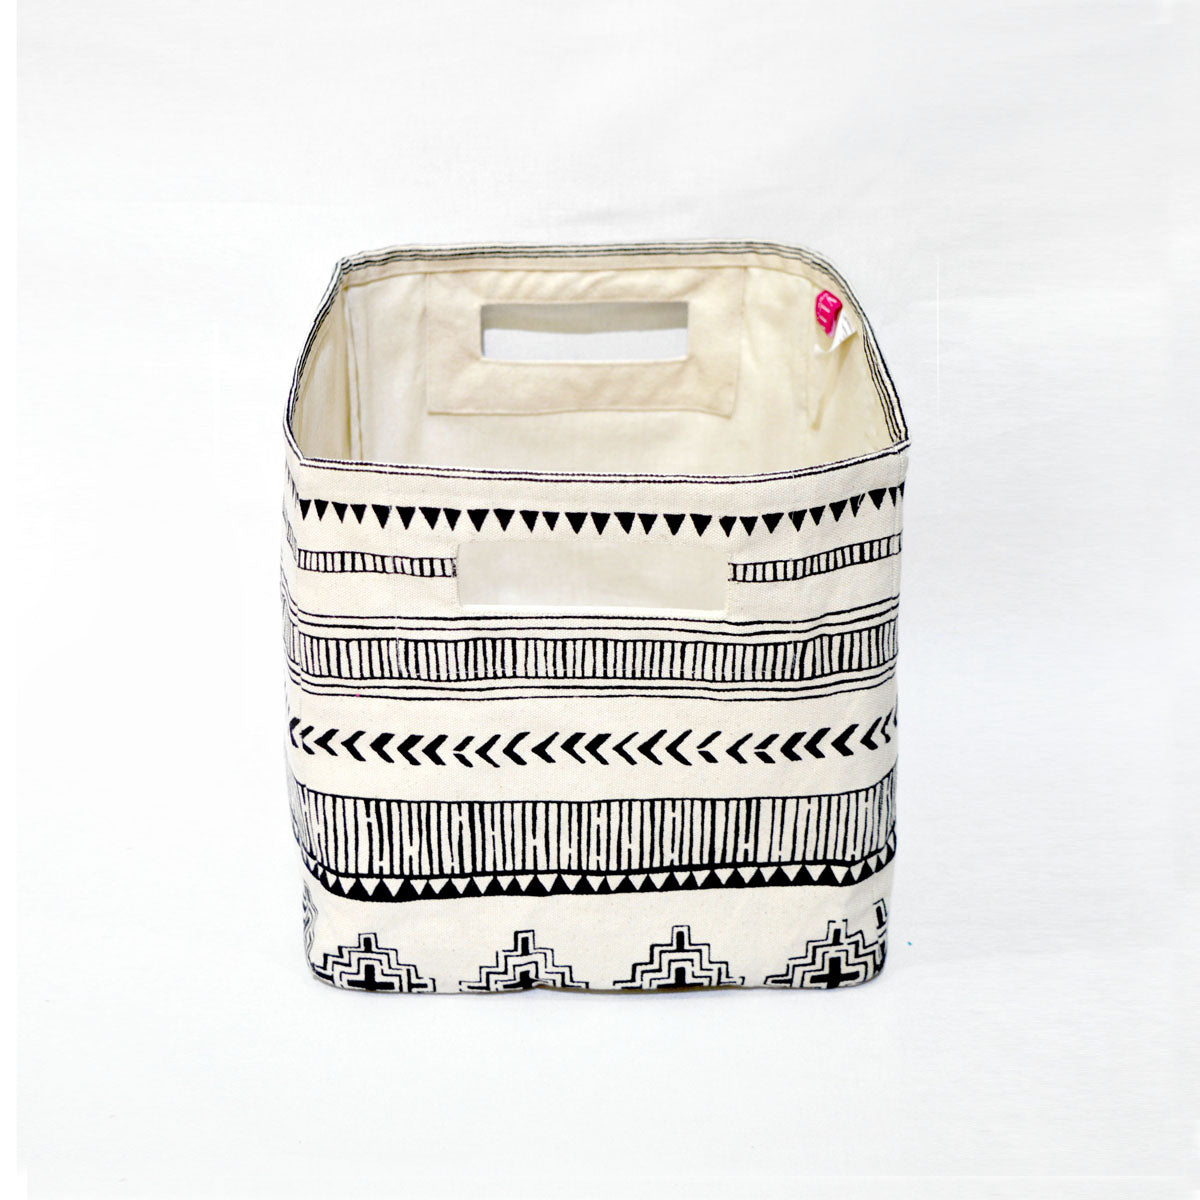 Square Storage basket, aztec print, black and white, canvas fabric, laundry hamper, sizes available